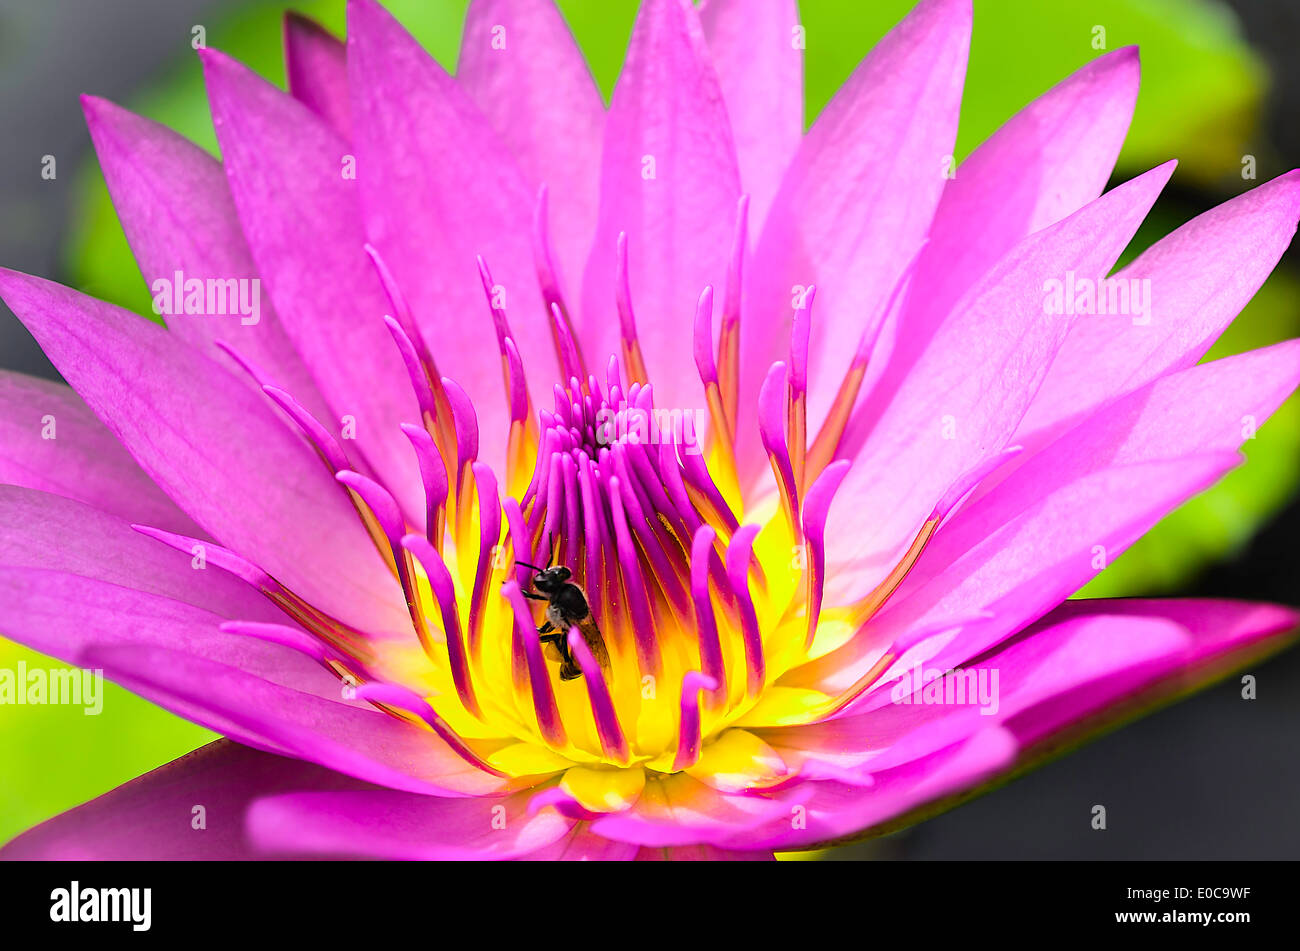 The lotus or water lily in pink-purple with yellow-pink pollen and Bug. Stock Photo